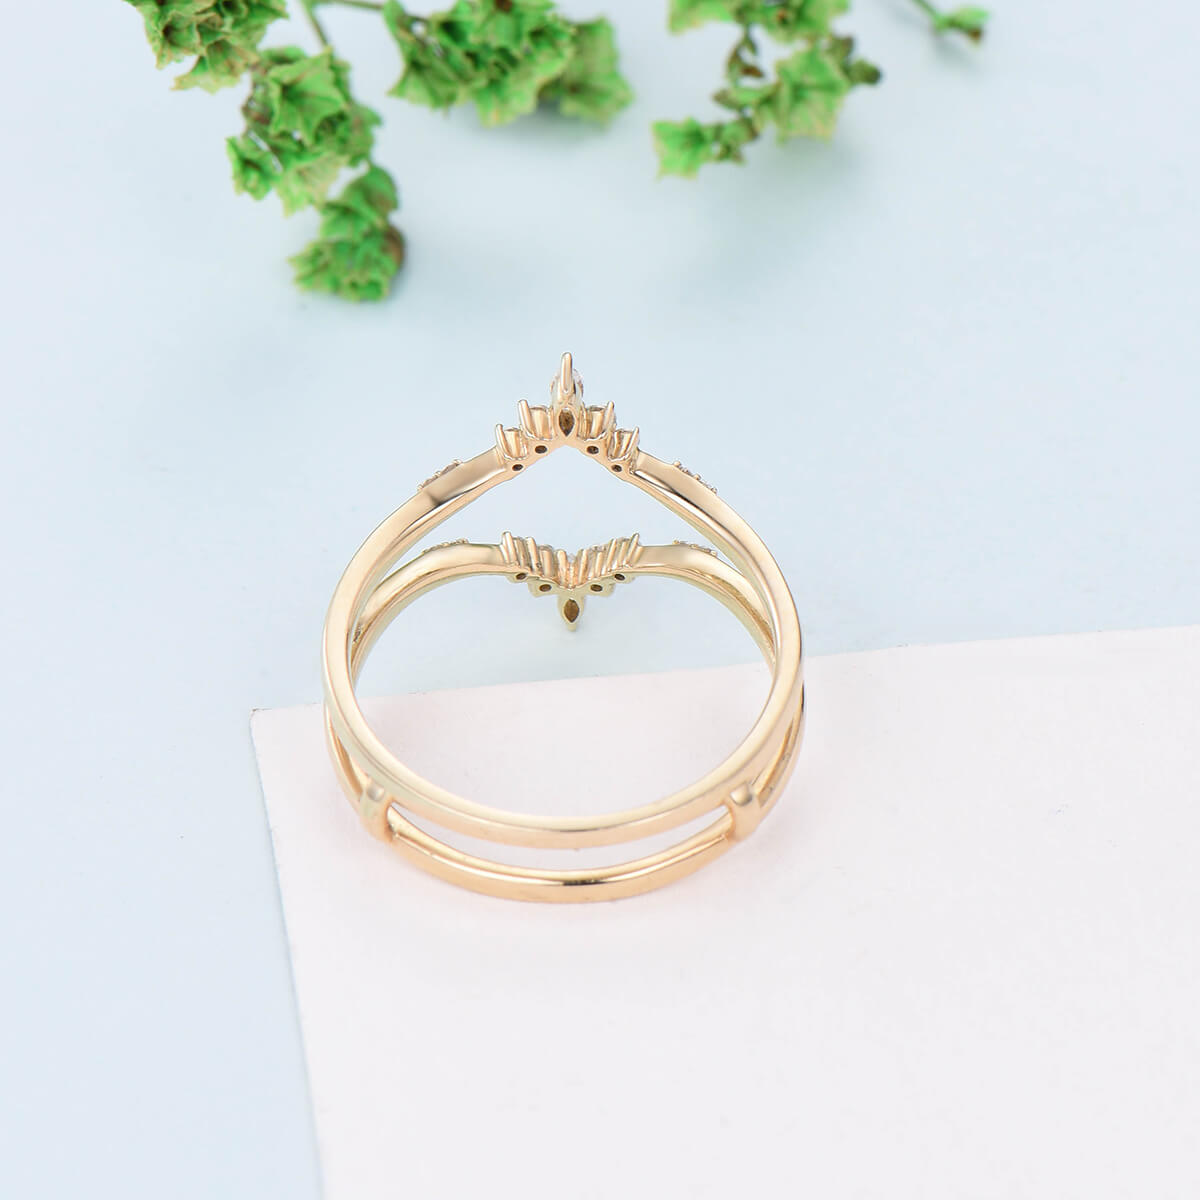 Double Curved V Moissanite Wedding Band Ladies Yellow Gold Wedding Ring Women Vintage Diamond Stacking Bridal Matching Ring Anniversary Gift - PENFINE